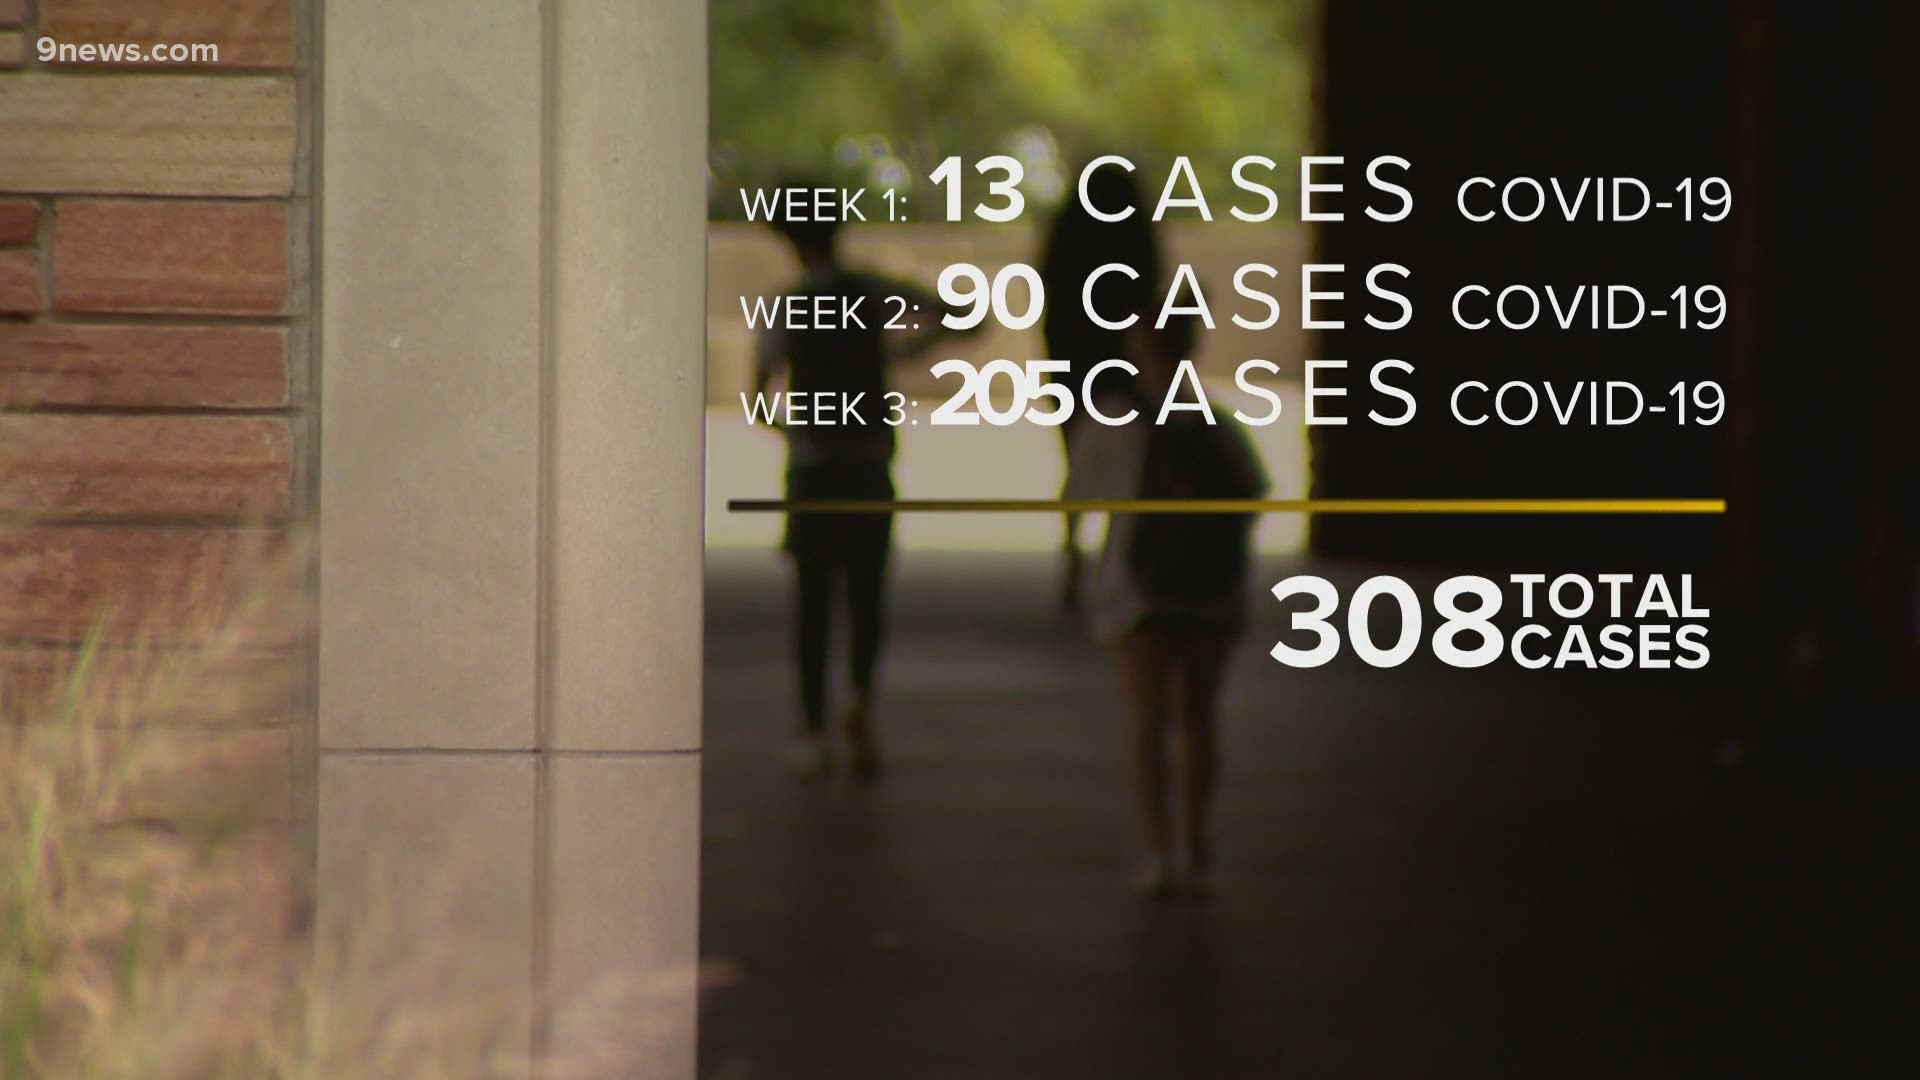 Cumulative cases so far this year stand at 308, jumping by 115 between weeks two and three alone.